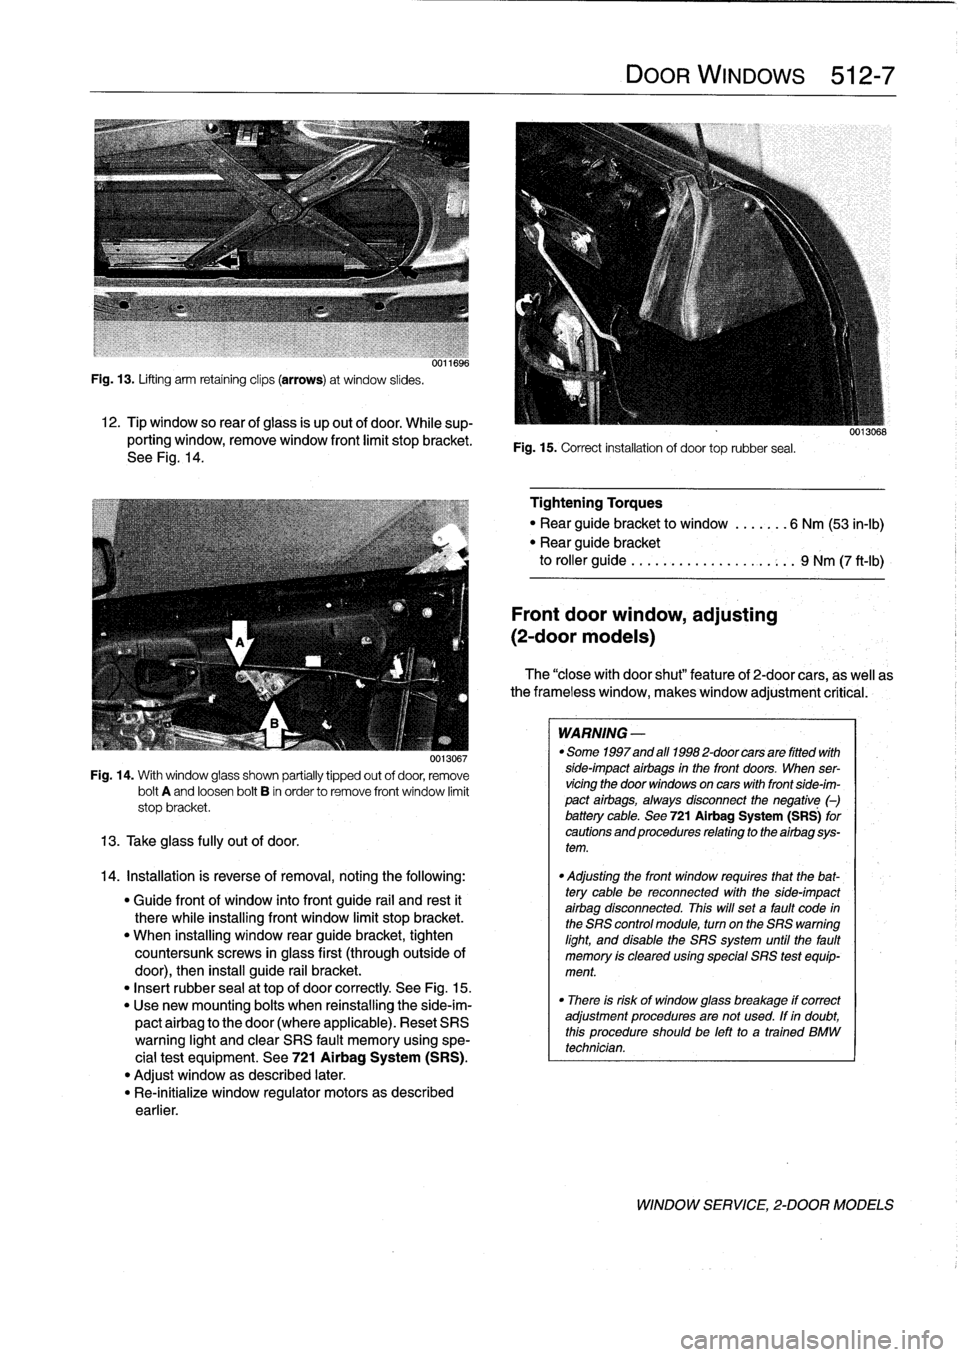 BMW 323i 1992 E36 Workshop Manual 
Fig
.
13
.
Lifting
arm
retaining
clips
(arrows)
at
window
slides
.

12
.
Tip
window
so
rear
ofglass
is
up
out
of
door
.
While
sup-
porting
window,
remove
window
front
limit
stopbracket
.
See
Fig
.
14